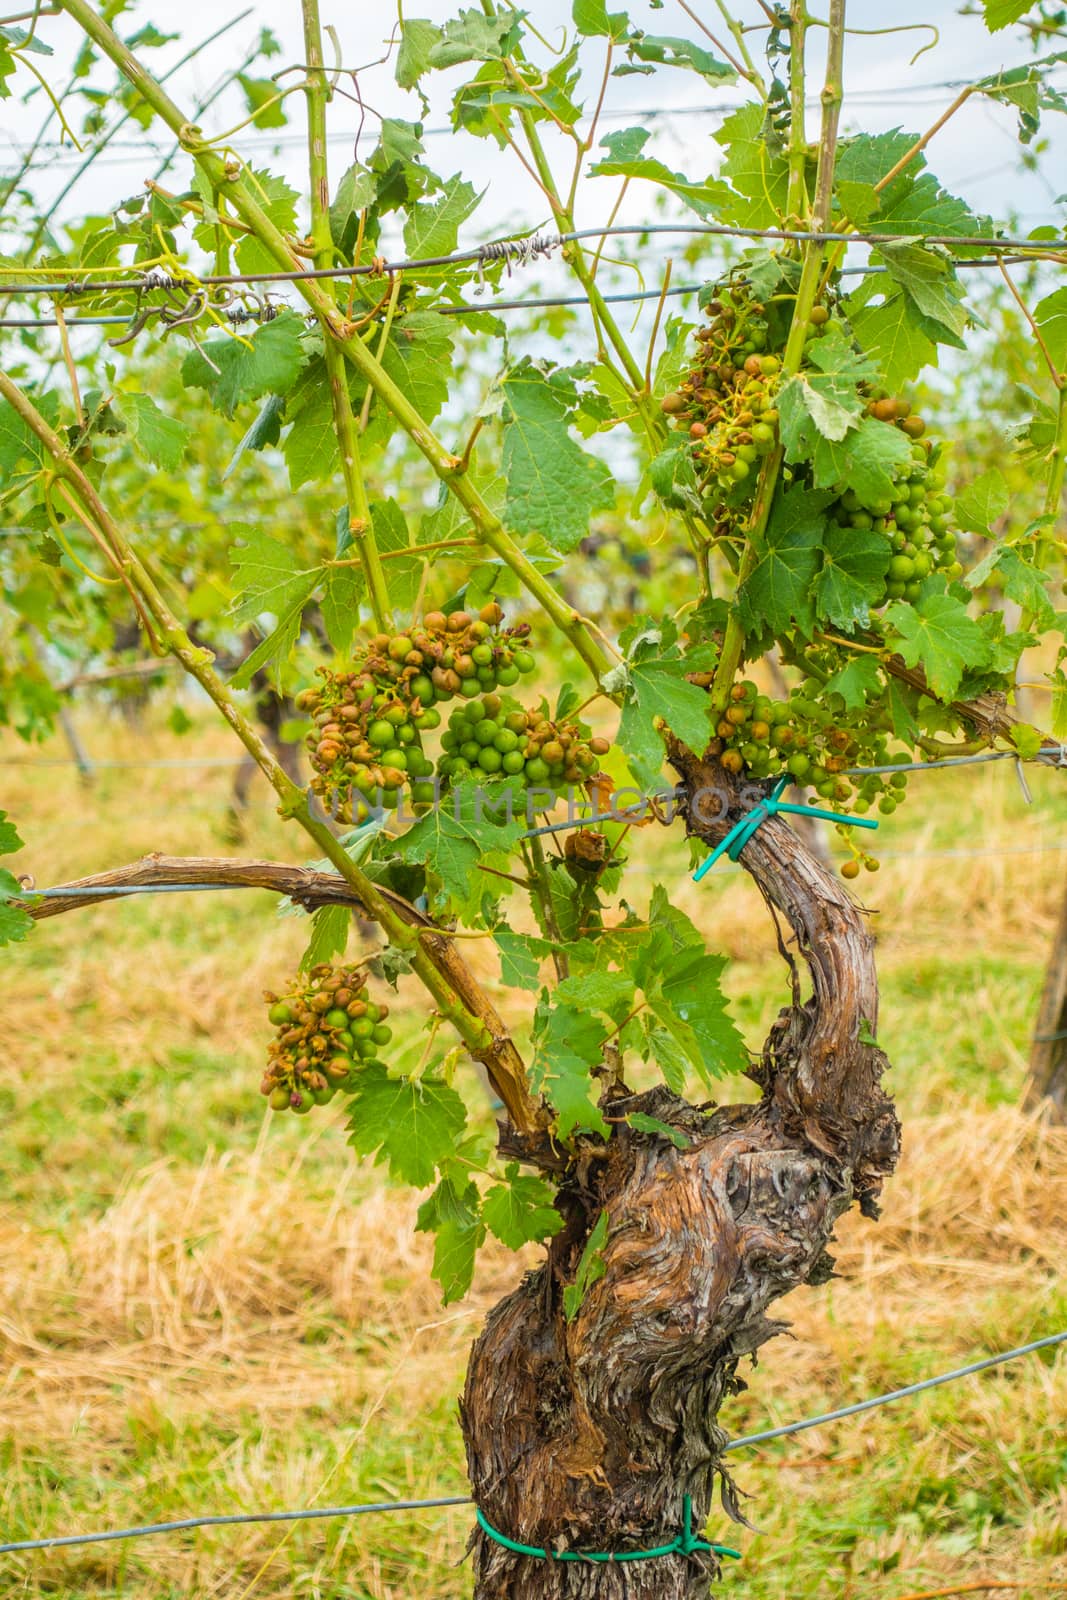 Vineyard and grapes damaged and crop destroyed after severe storm with hail destroying the major portion of the harvest. Plants will have to be treated with chemicals to survive